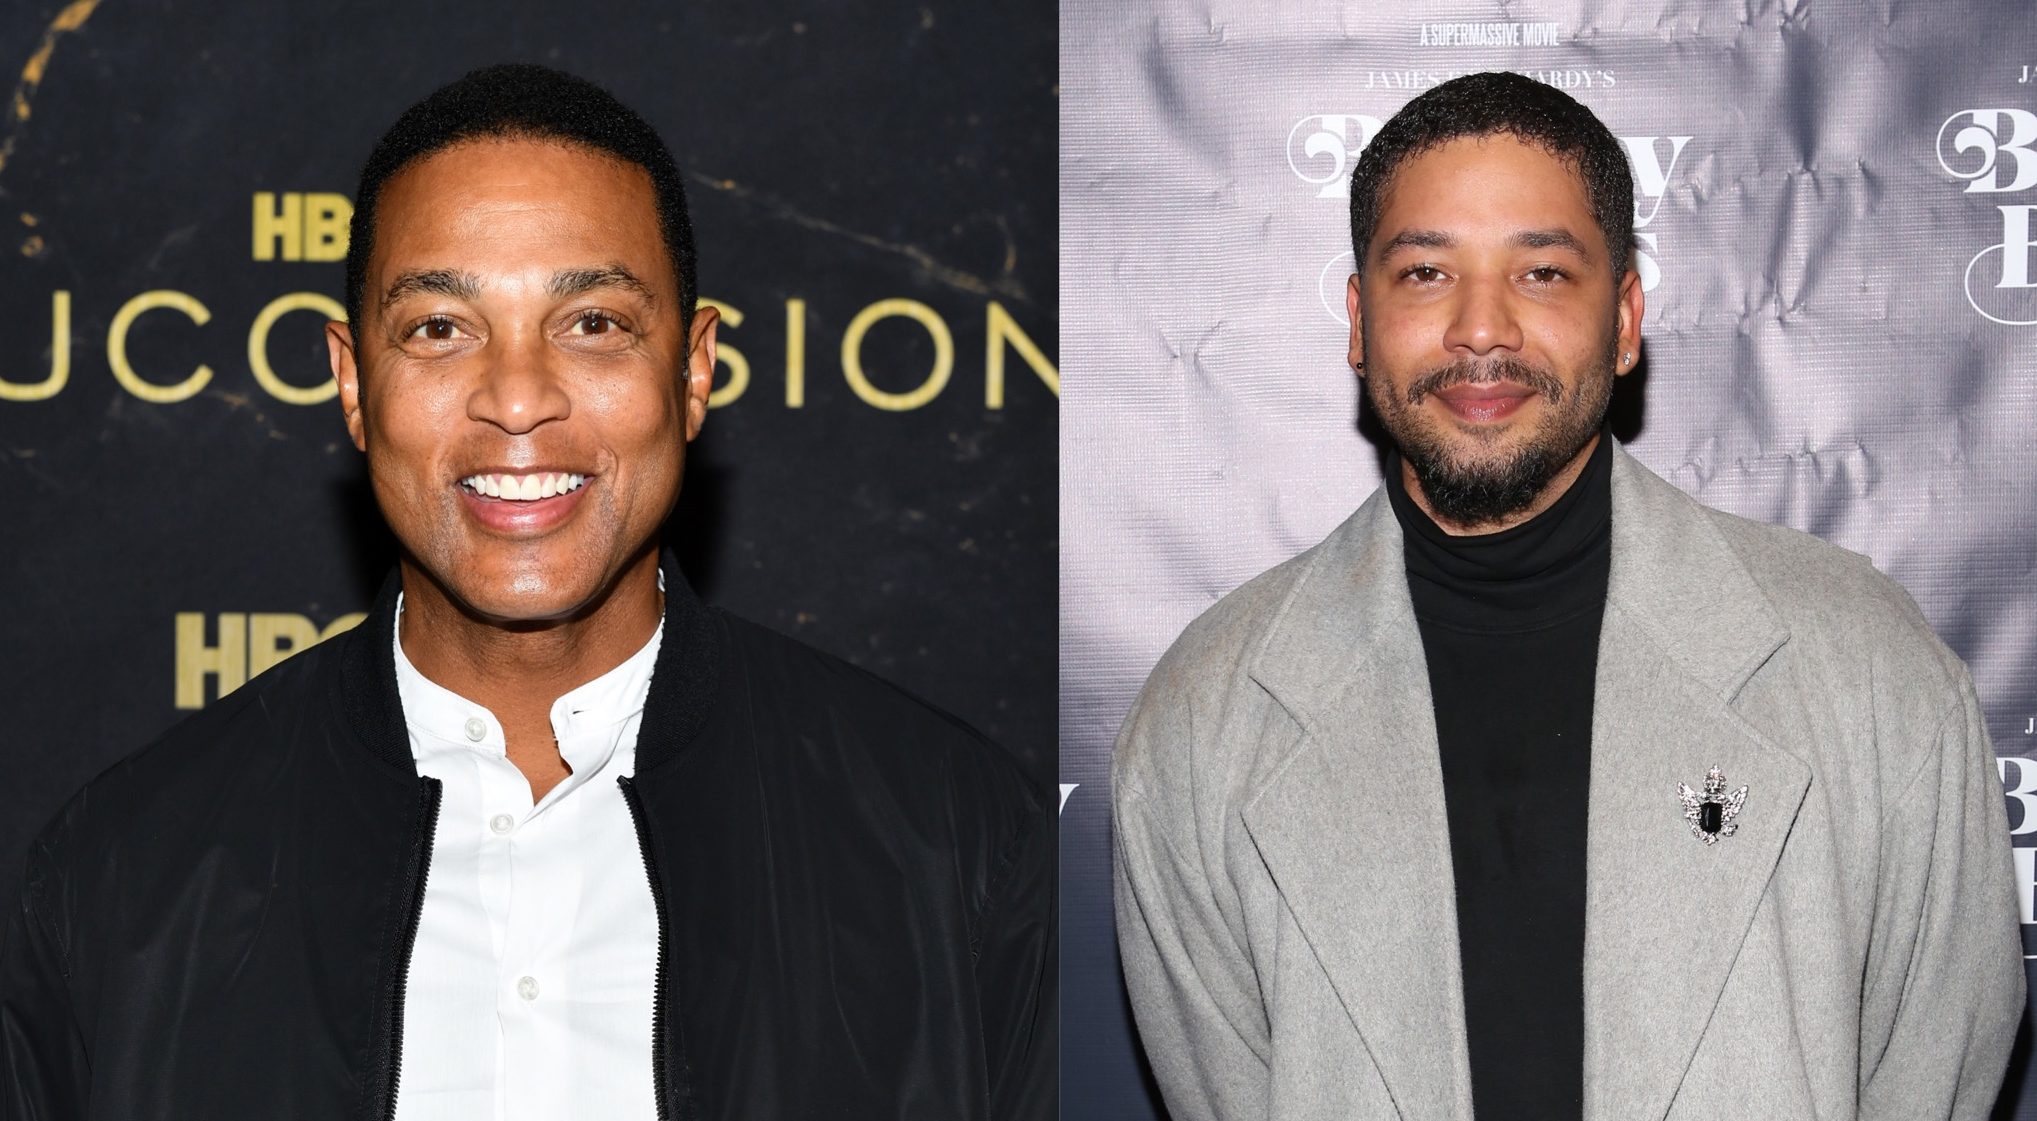 Don Lemon Says Jussie Smollett Made Up "Too Many Lies" Hours After Guilty Verdict